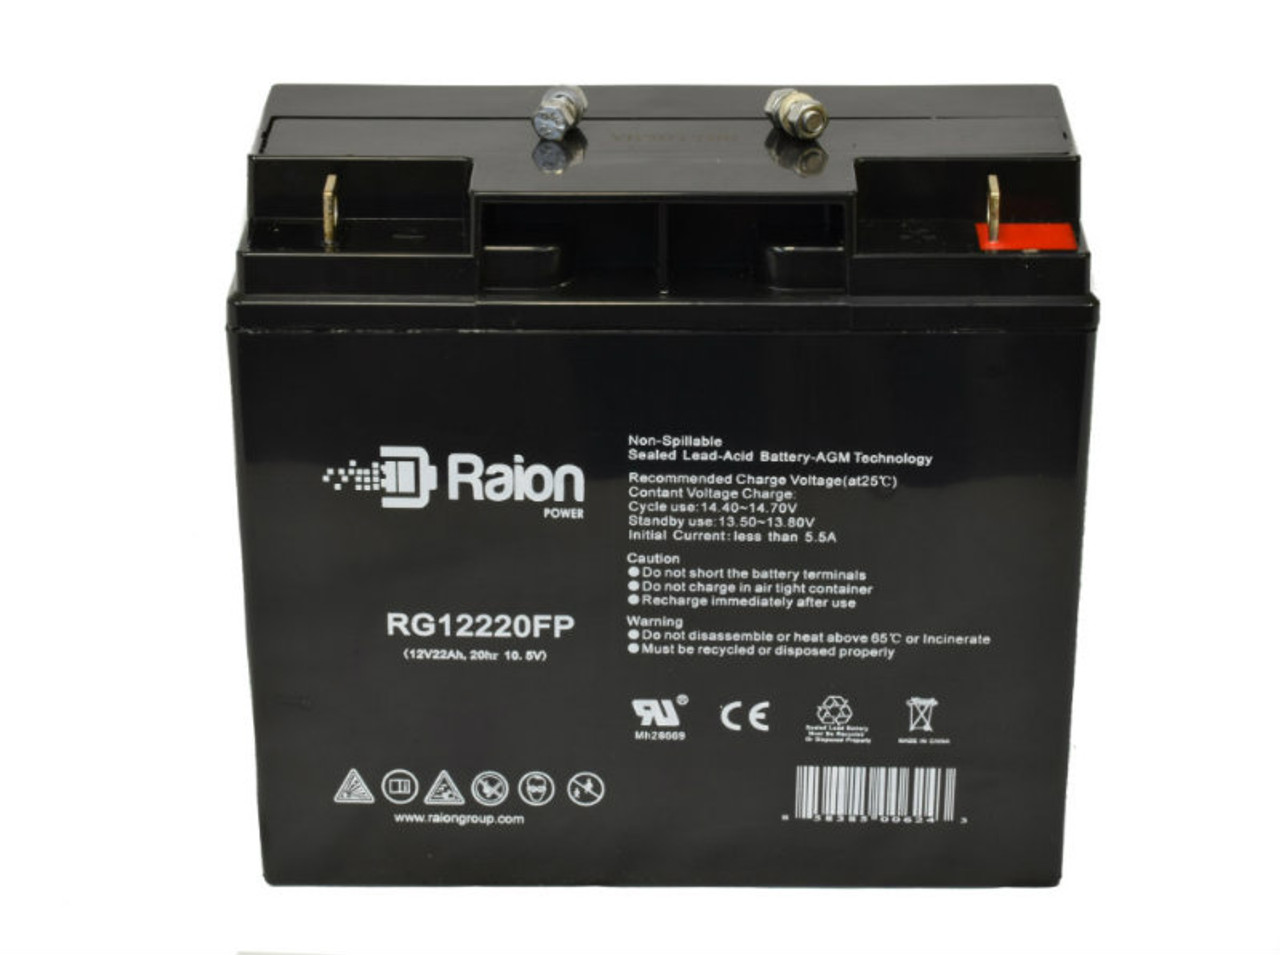 Raion Power 12V 22Ah Rechargeable Non-Spillable Replacement Battery for Golden Technologies Buzzaround XL GB146 BLUE